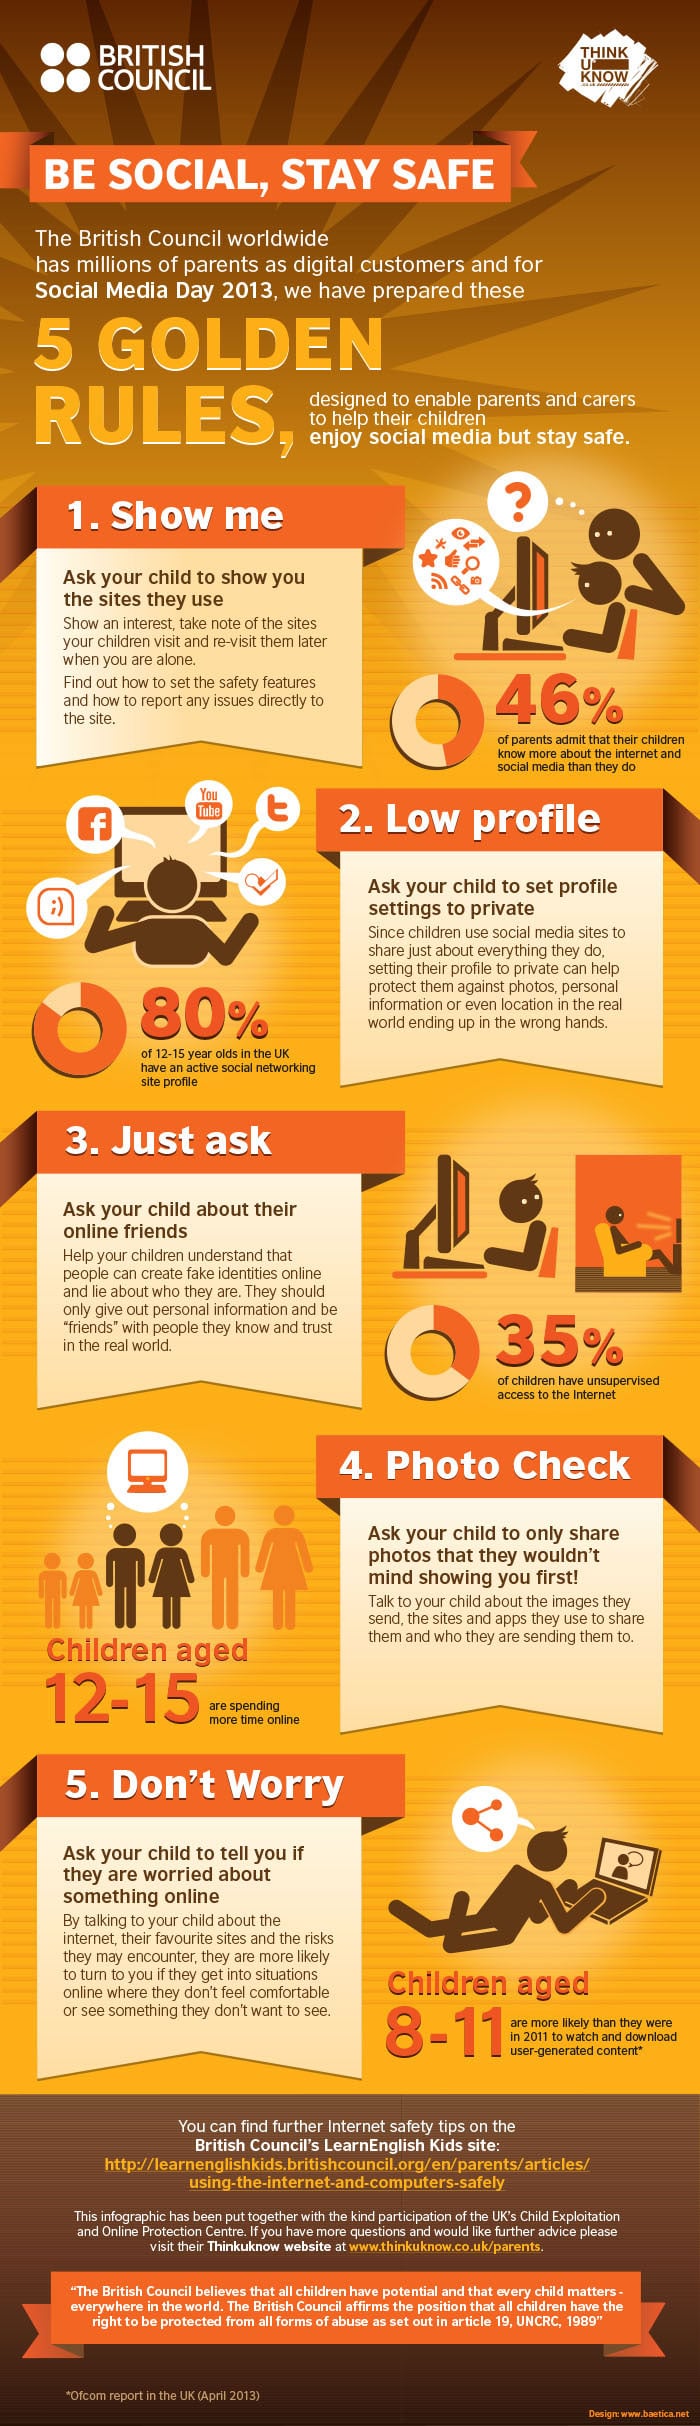 5 Ways To Help Keep Children Safe In Social Media [Infographic]